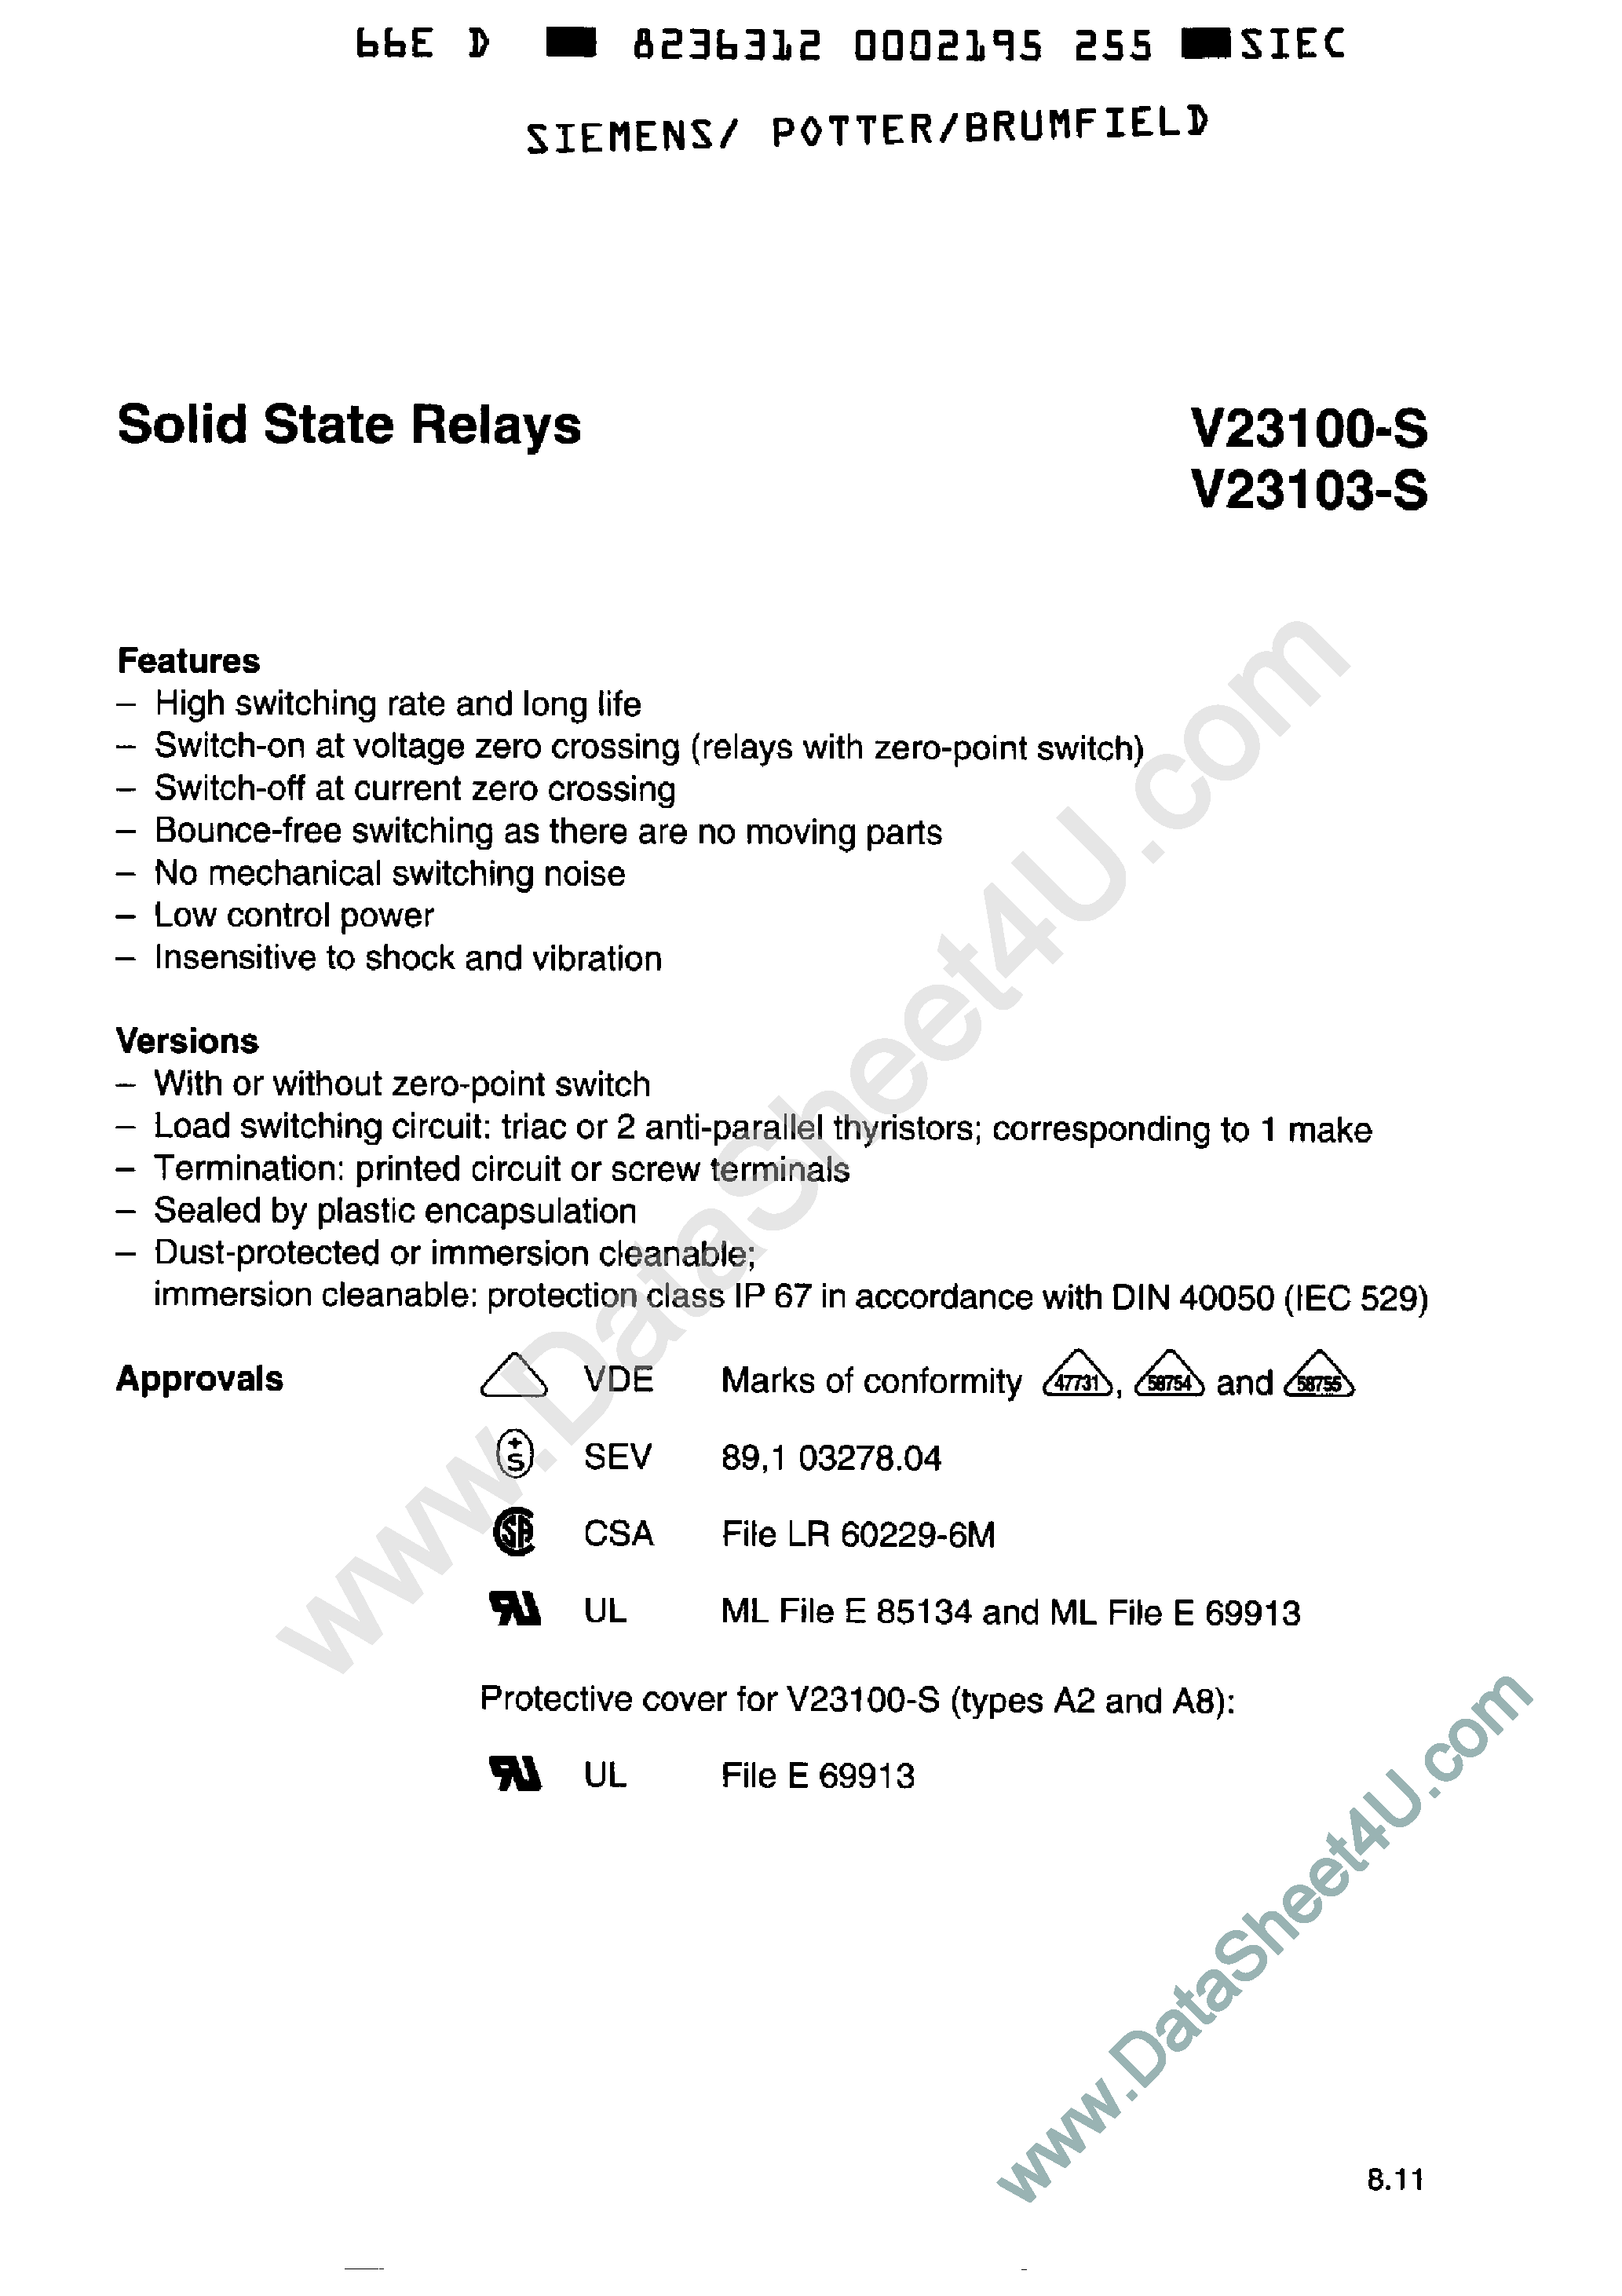 Datasheet V23100-S - (V23100-S / V23103-S) SOLID STATE REPLAYS page 1